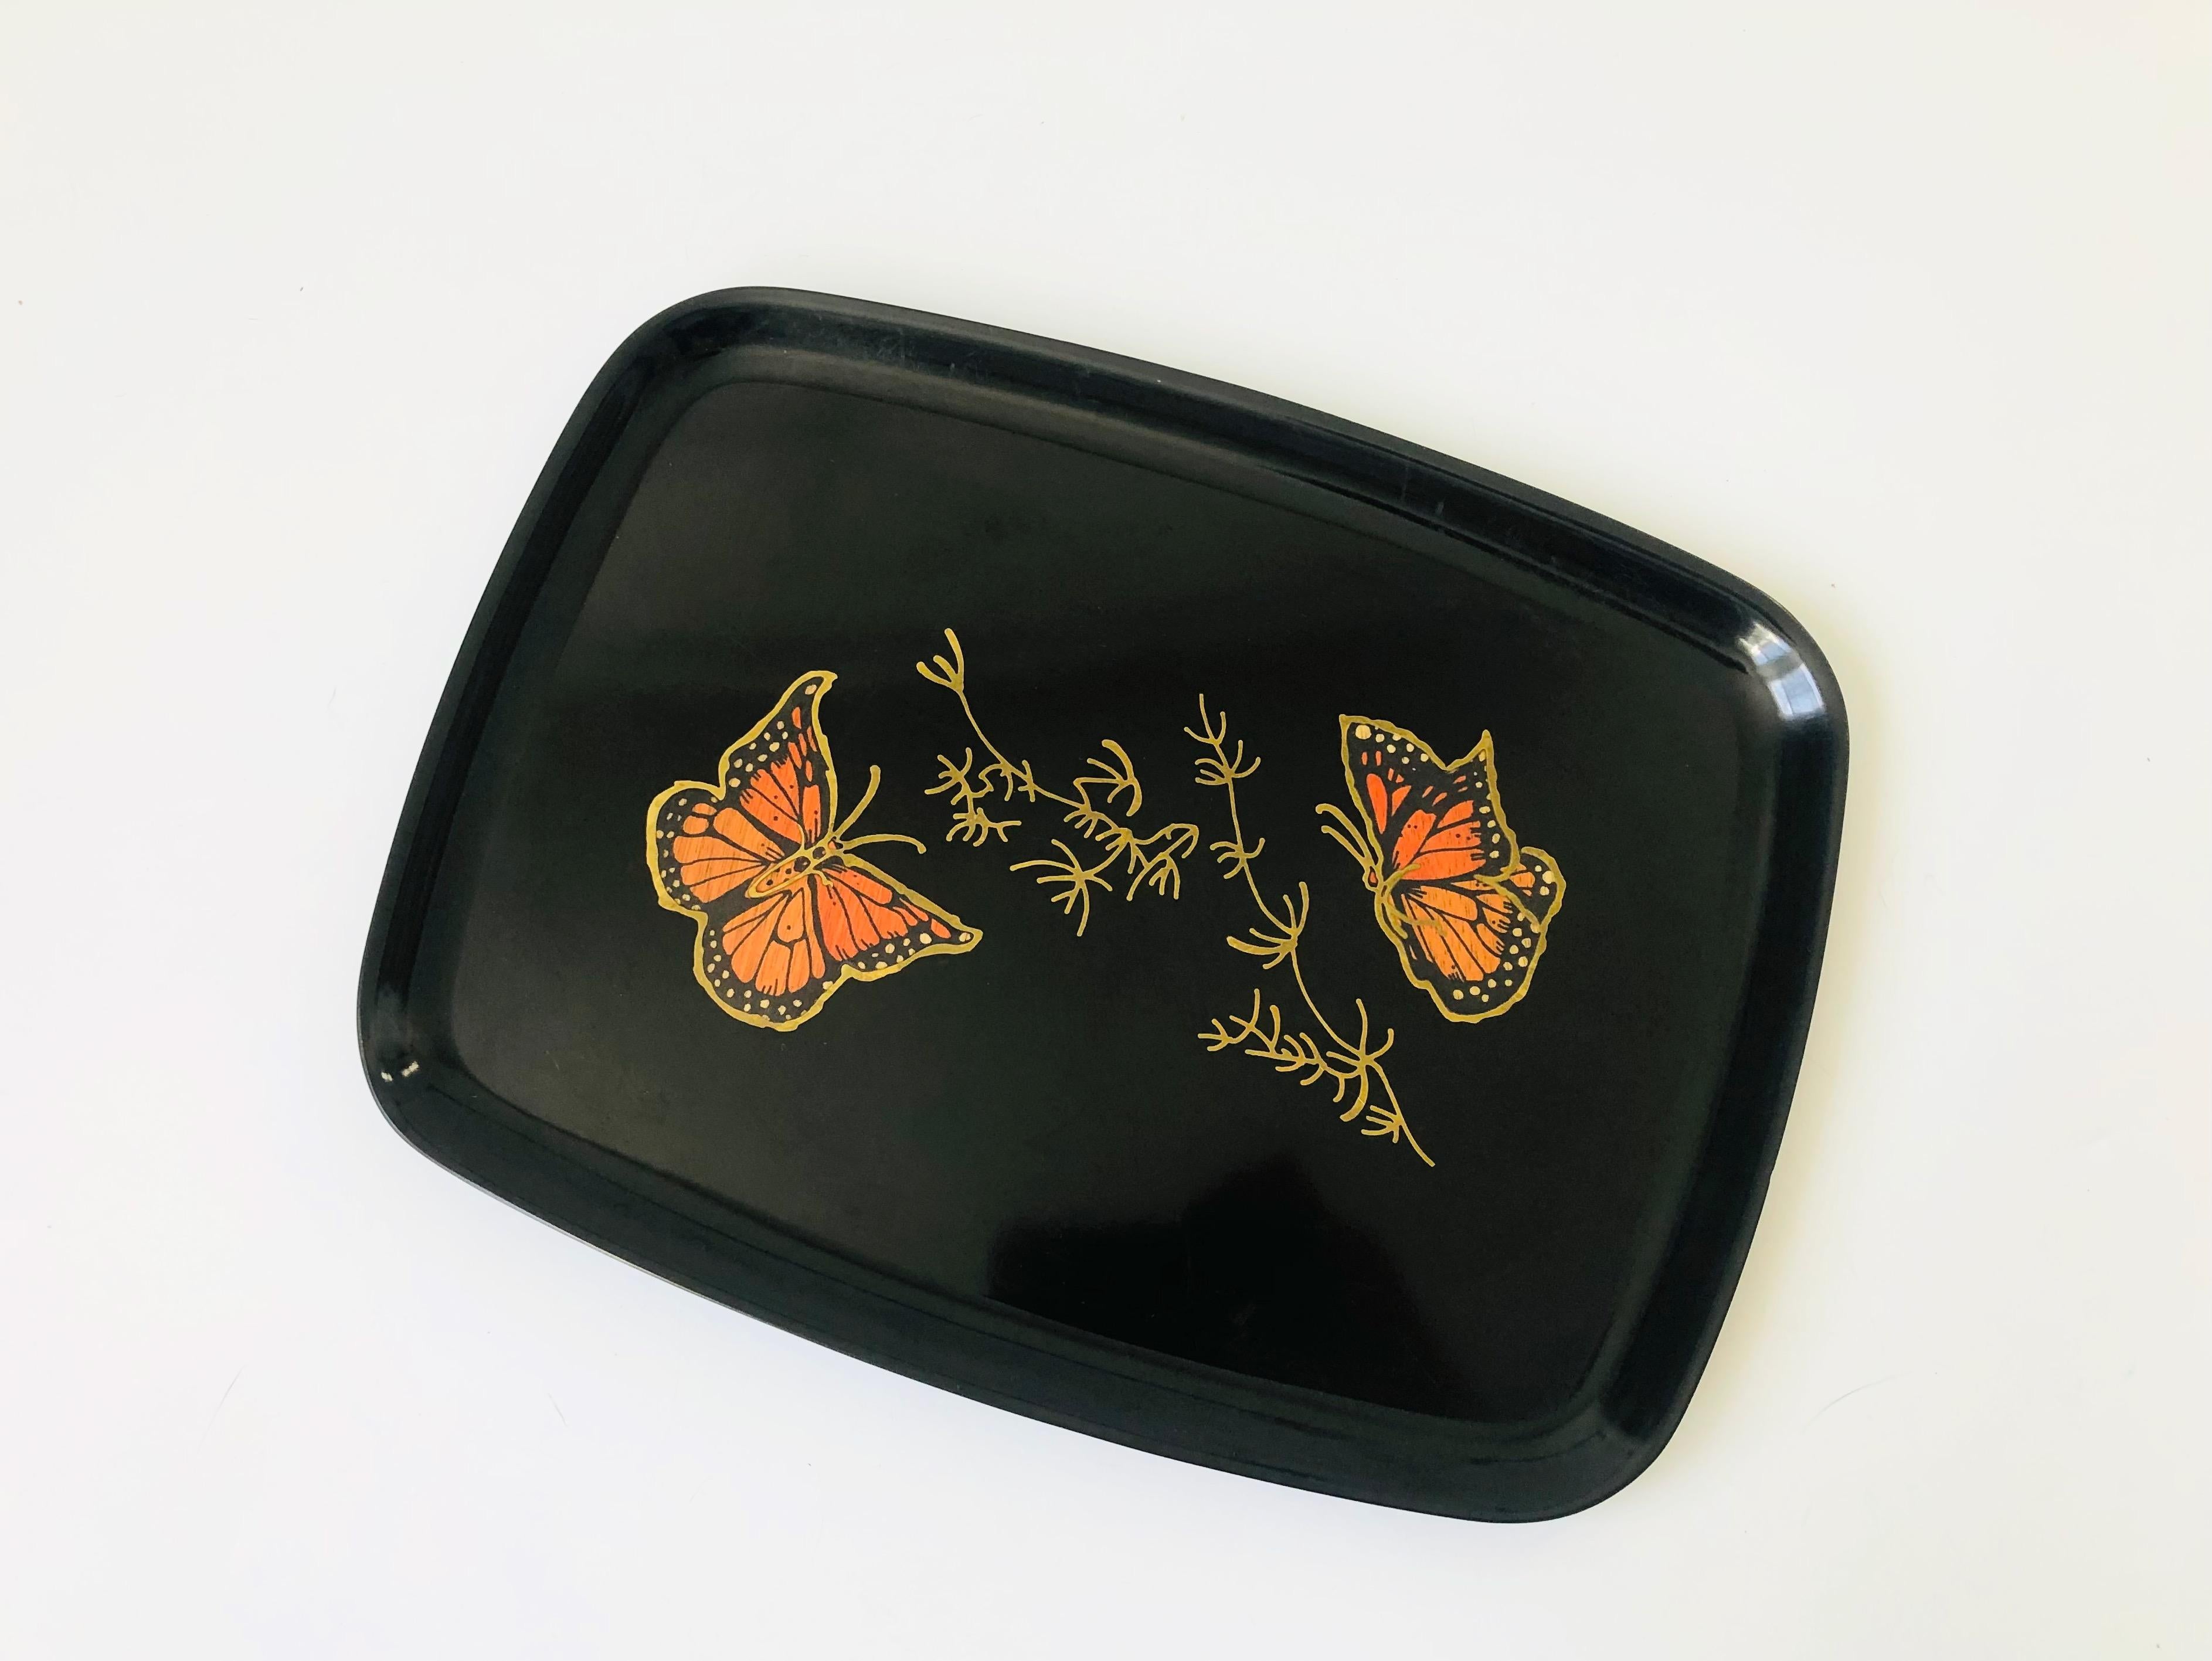 A wonderful vintage rectangular tray. The image s of butterflies in the center of the tray are formed from small pieces of inlaid shells, coins, woods, and metals fused into a satin black durable plastic-like material called phenolic. Made in